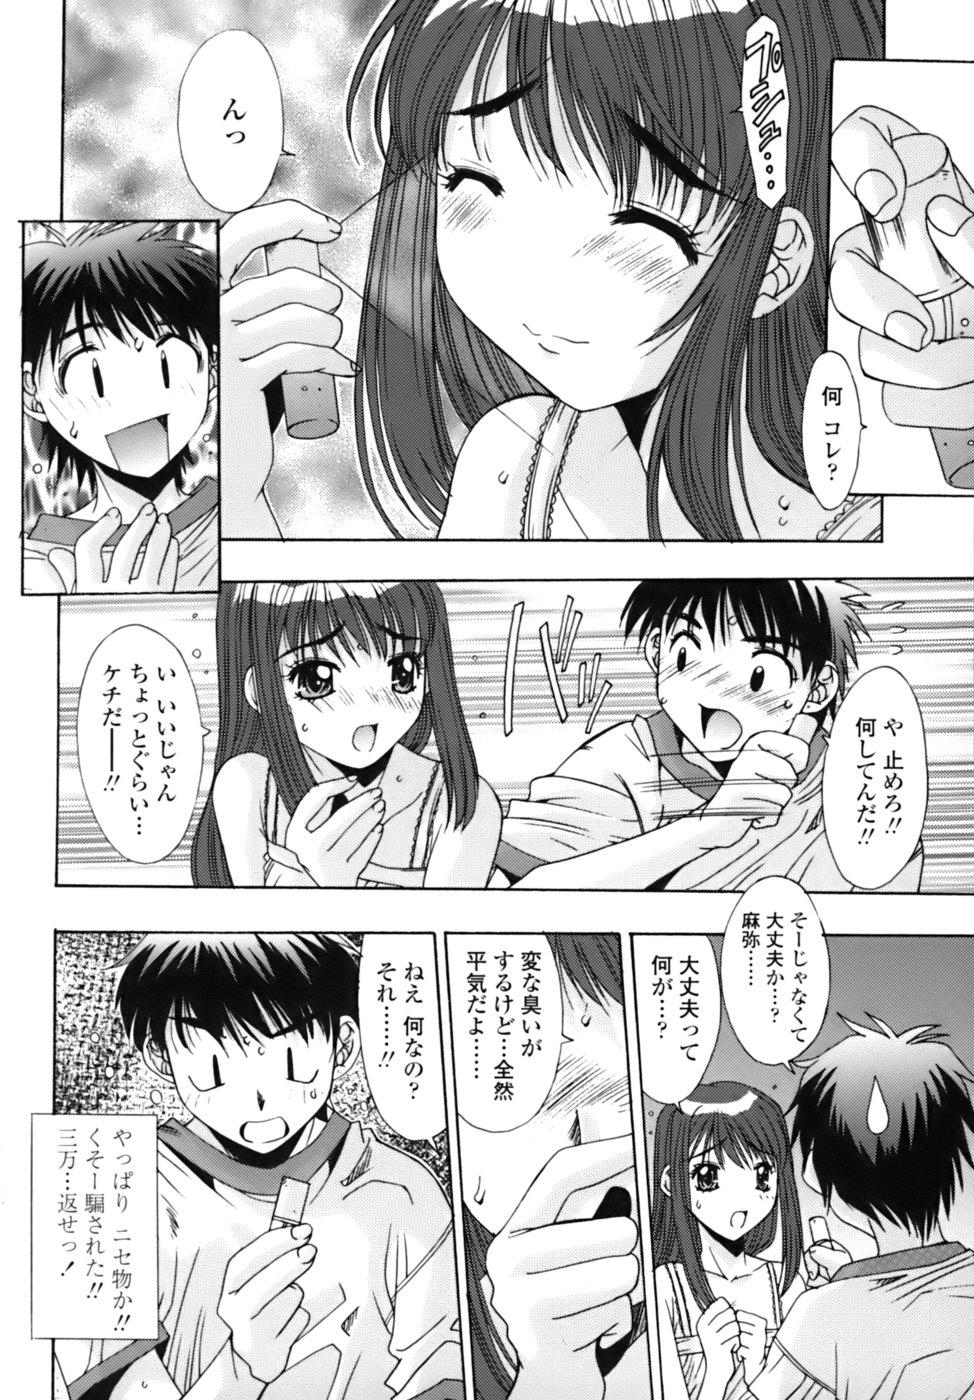 Gaystraight Sange No Koku - At the Time of Scattering Flowers Punheta - Page 11